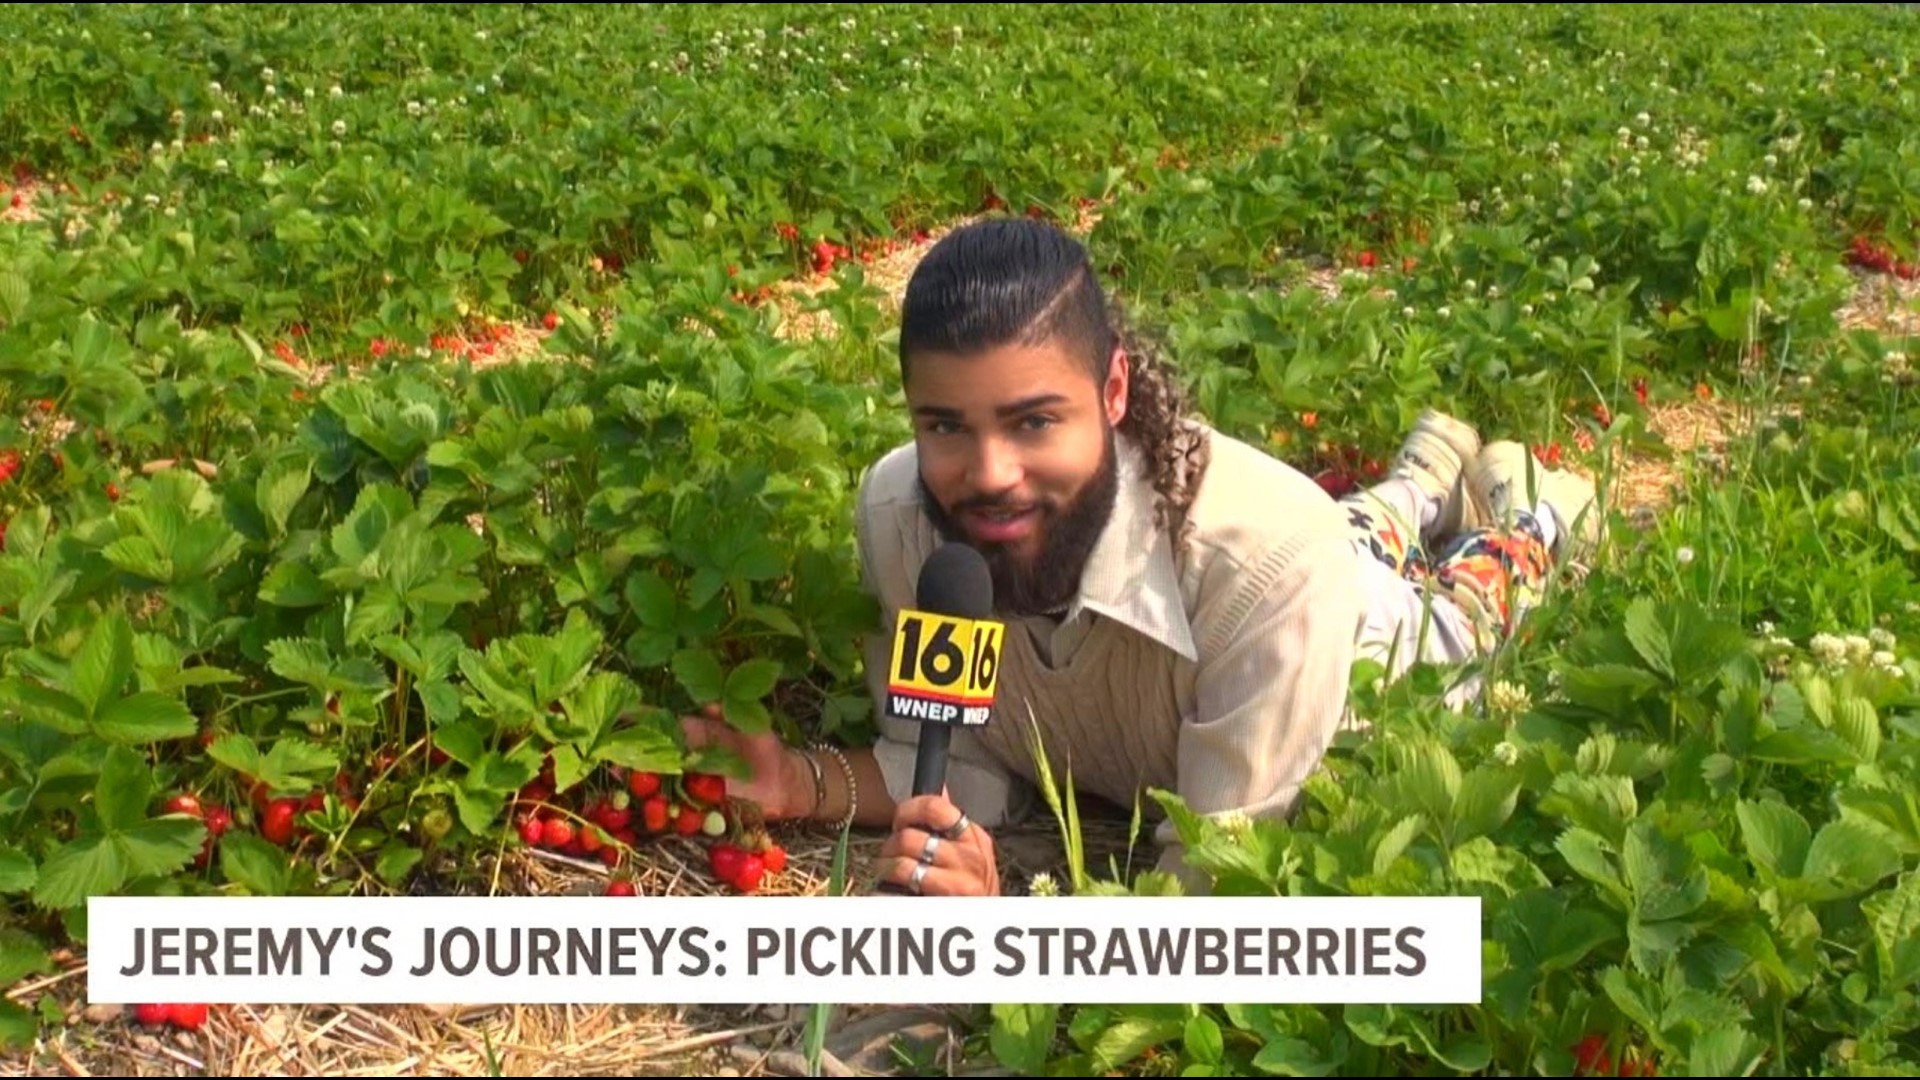 In this journey, Jeremy Lewan took a trip to harvest strawberries at Pallman Farms, after the crop was put through the wringer due to this Spring's extreme weather.